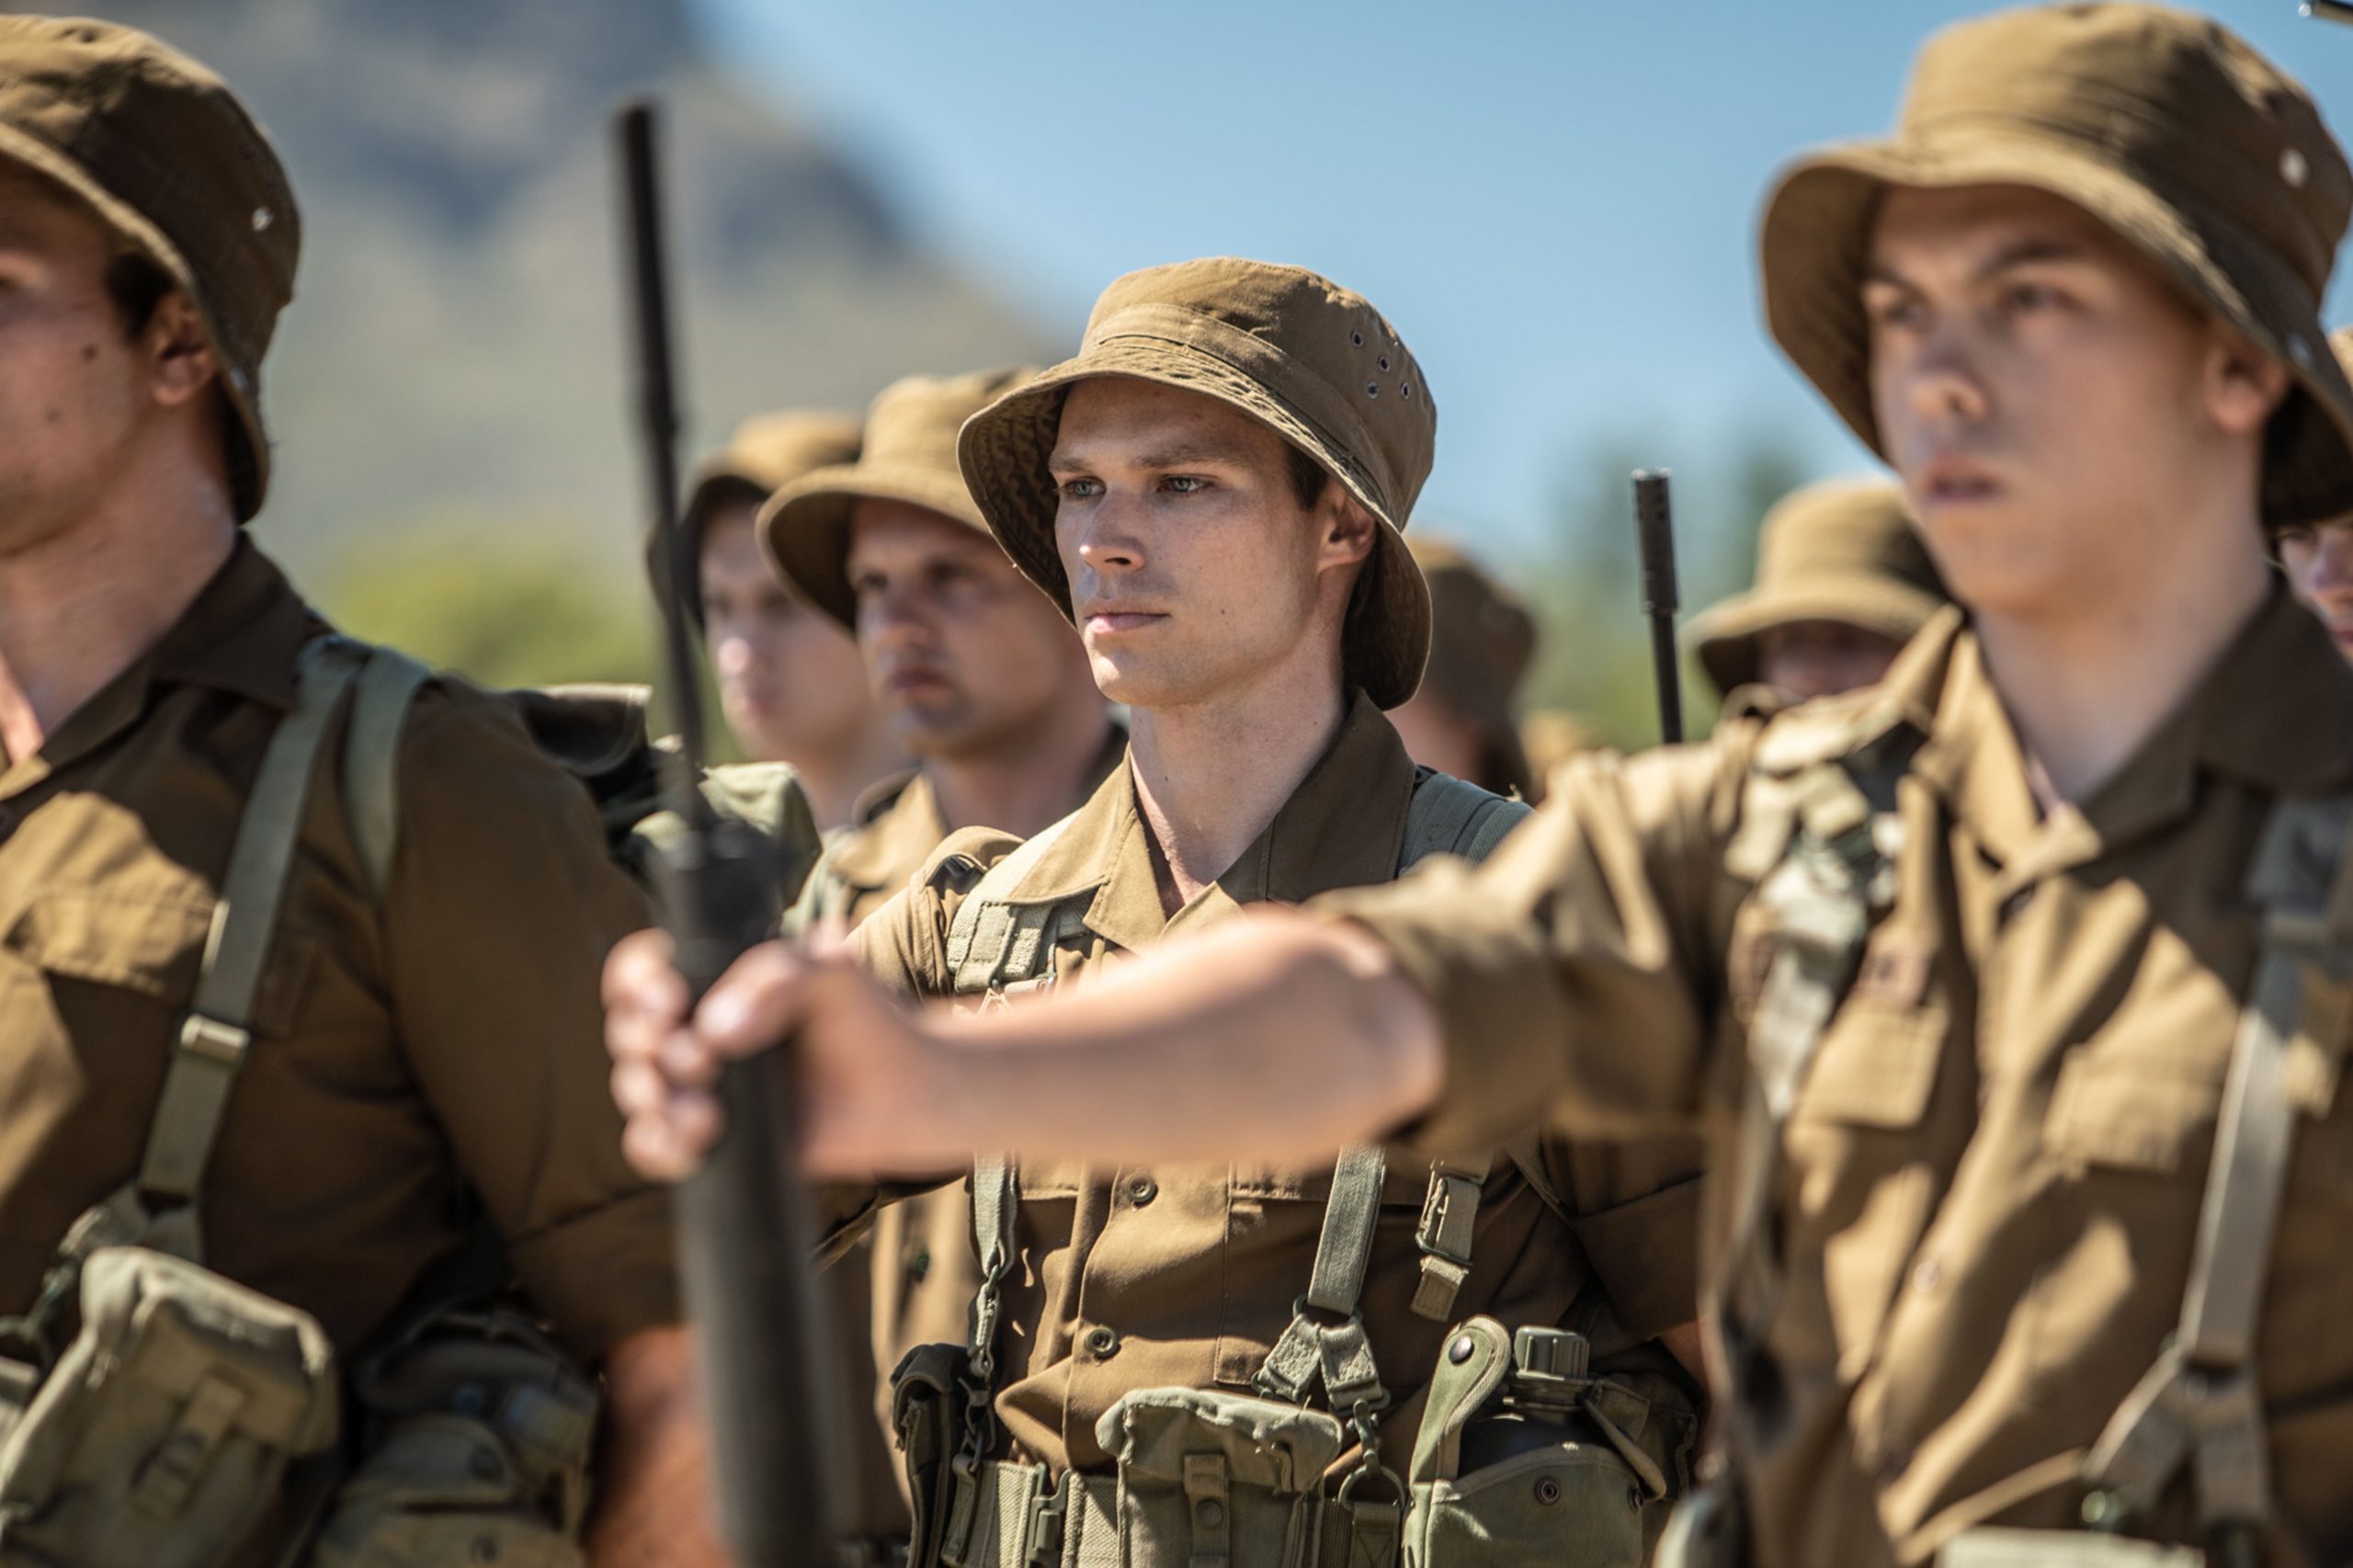 South African Movie Moffie Rated as One of 'Best Films of 2020 So Far